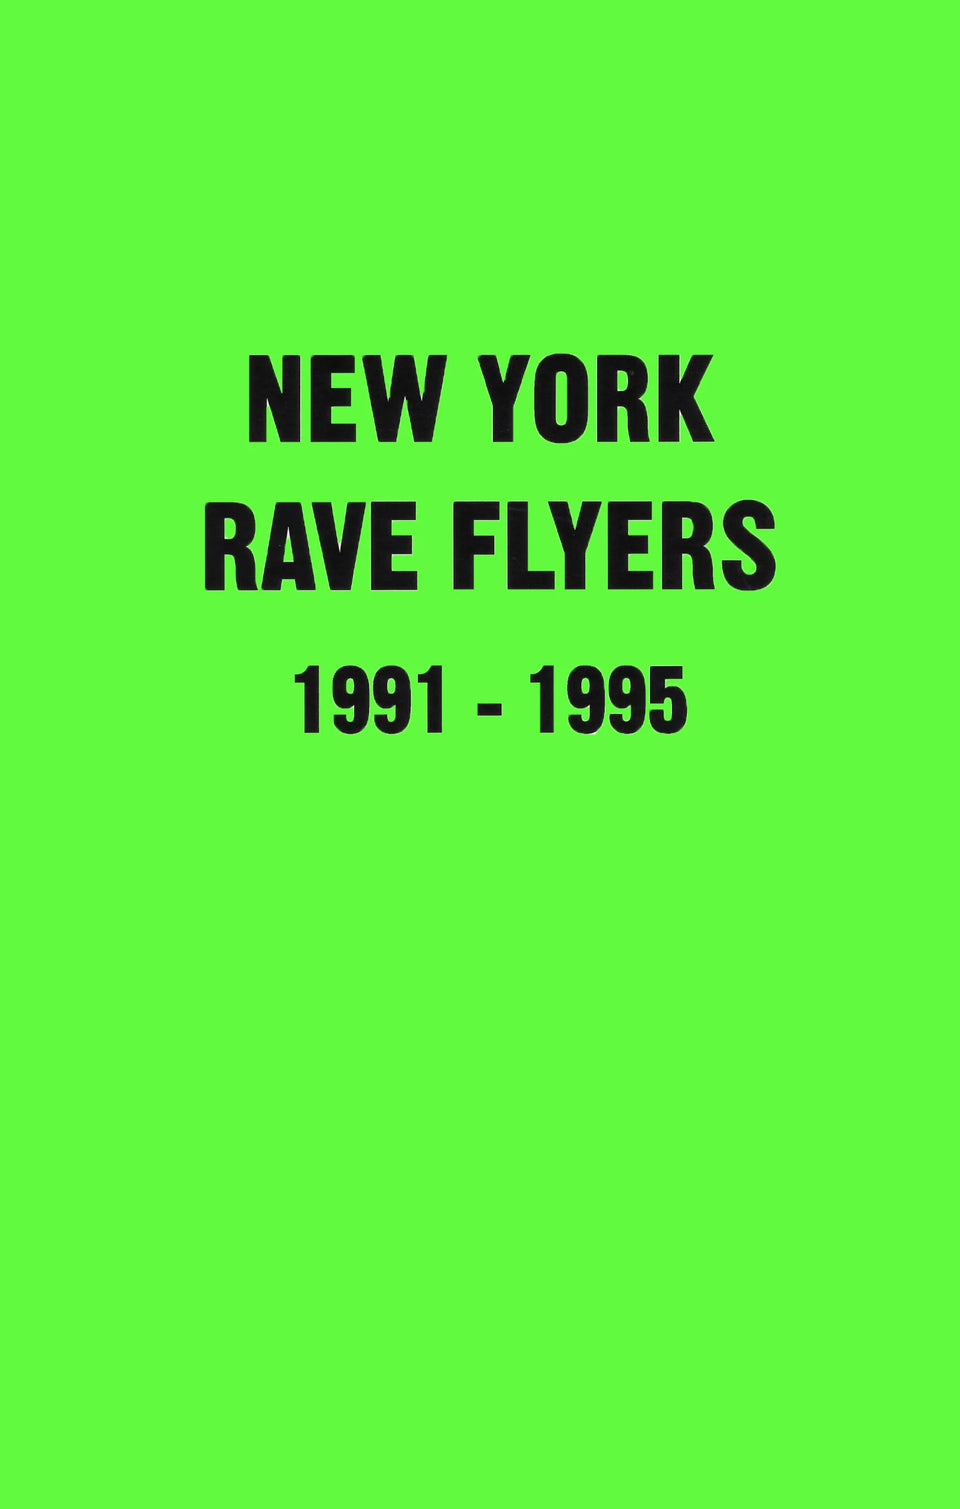 NY Rave Flyers 1991-1995 - new_york_rave_cover_green